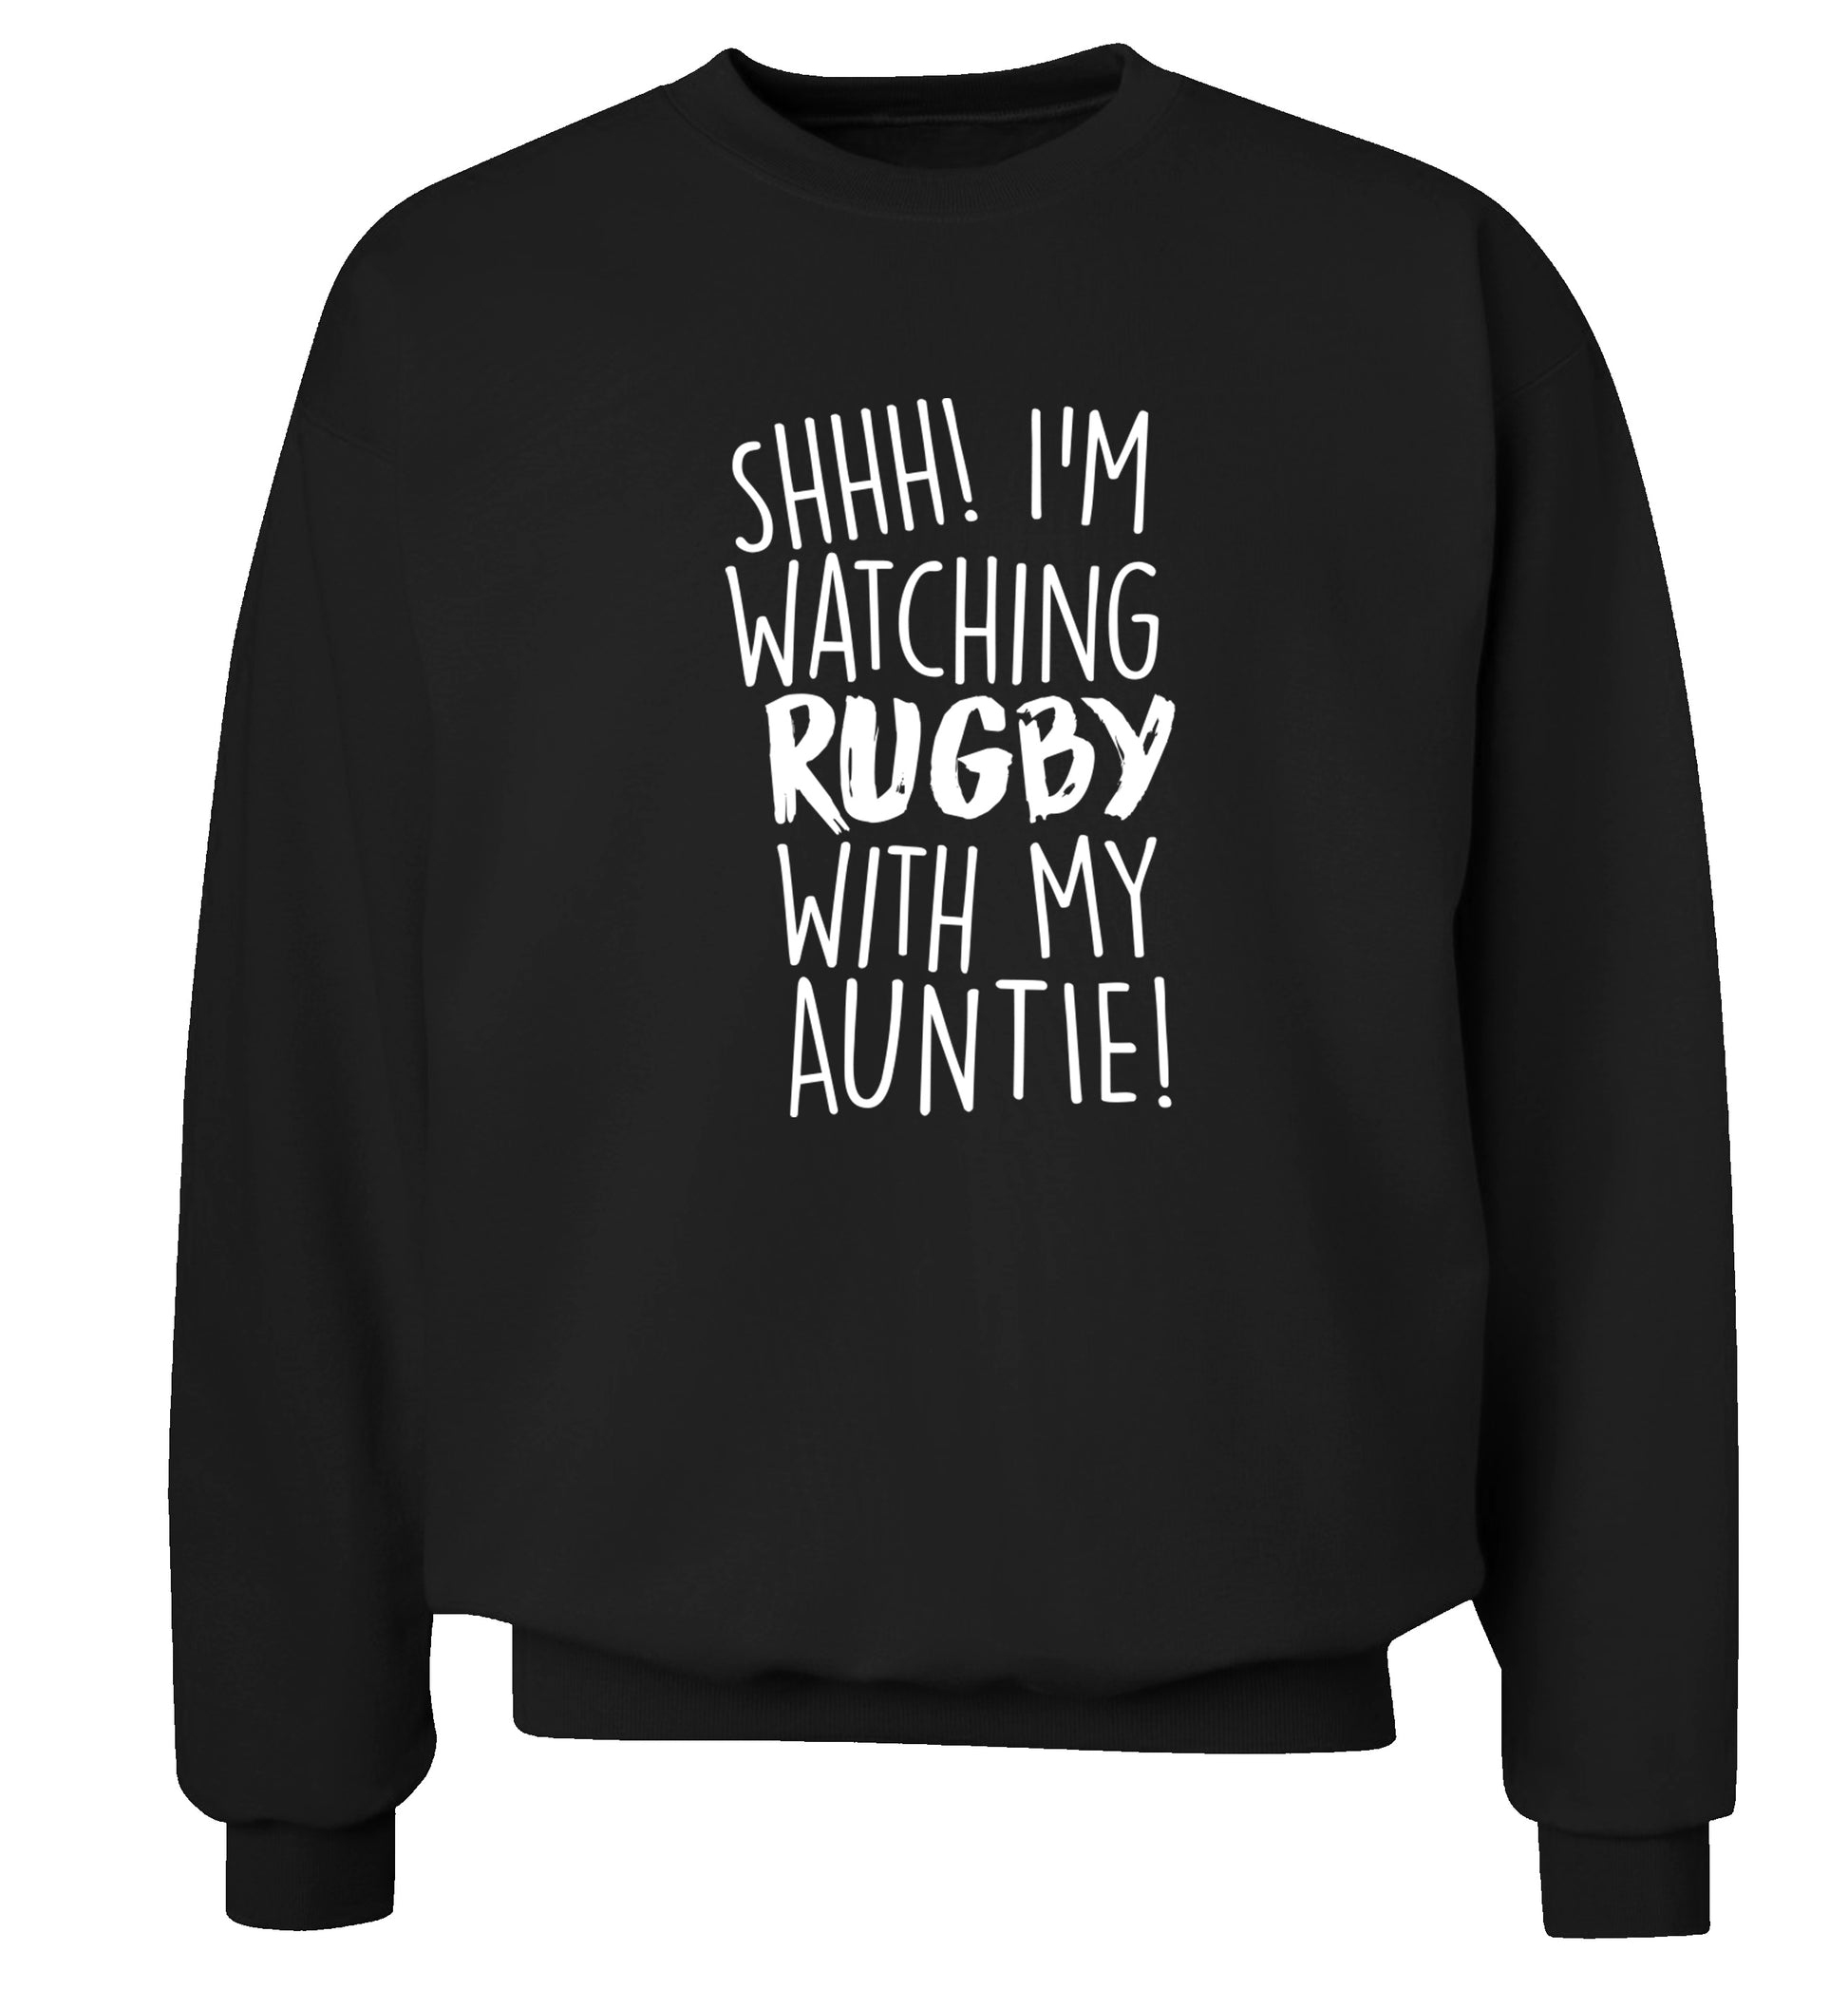 Shhh I'm watchin rugby with my auntie Adult's unisex black Sweater 2XL